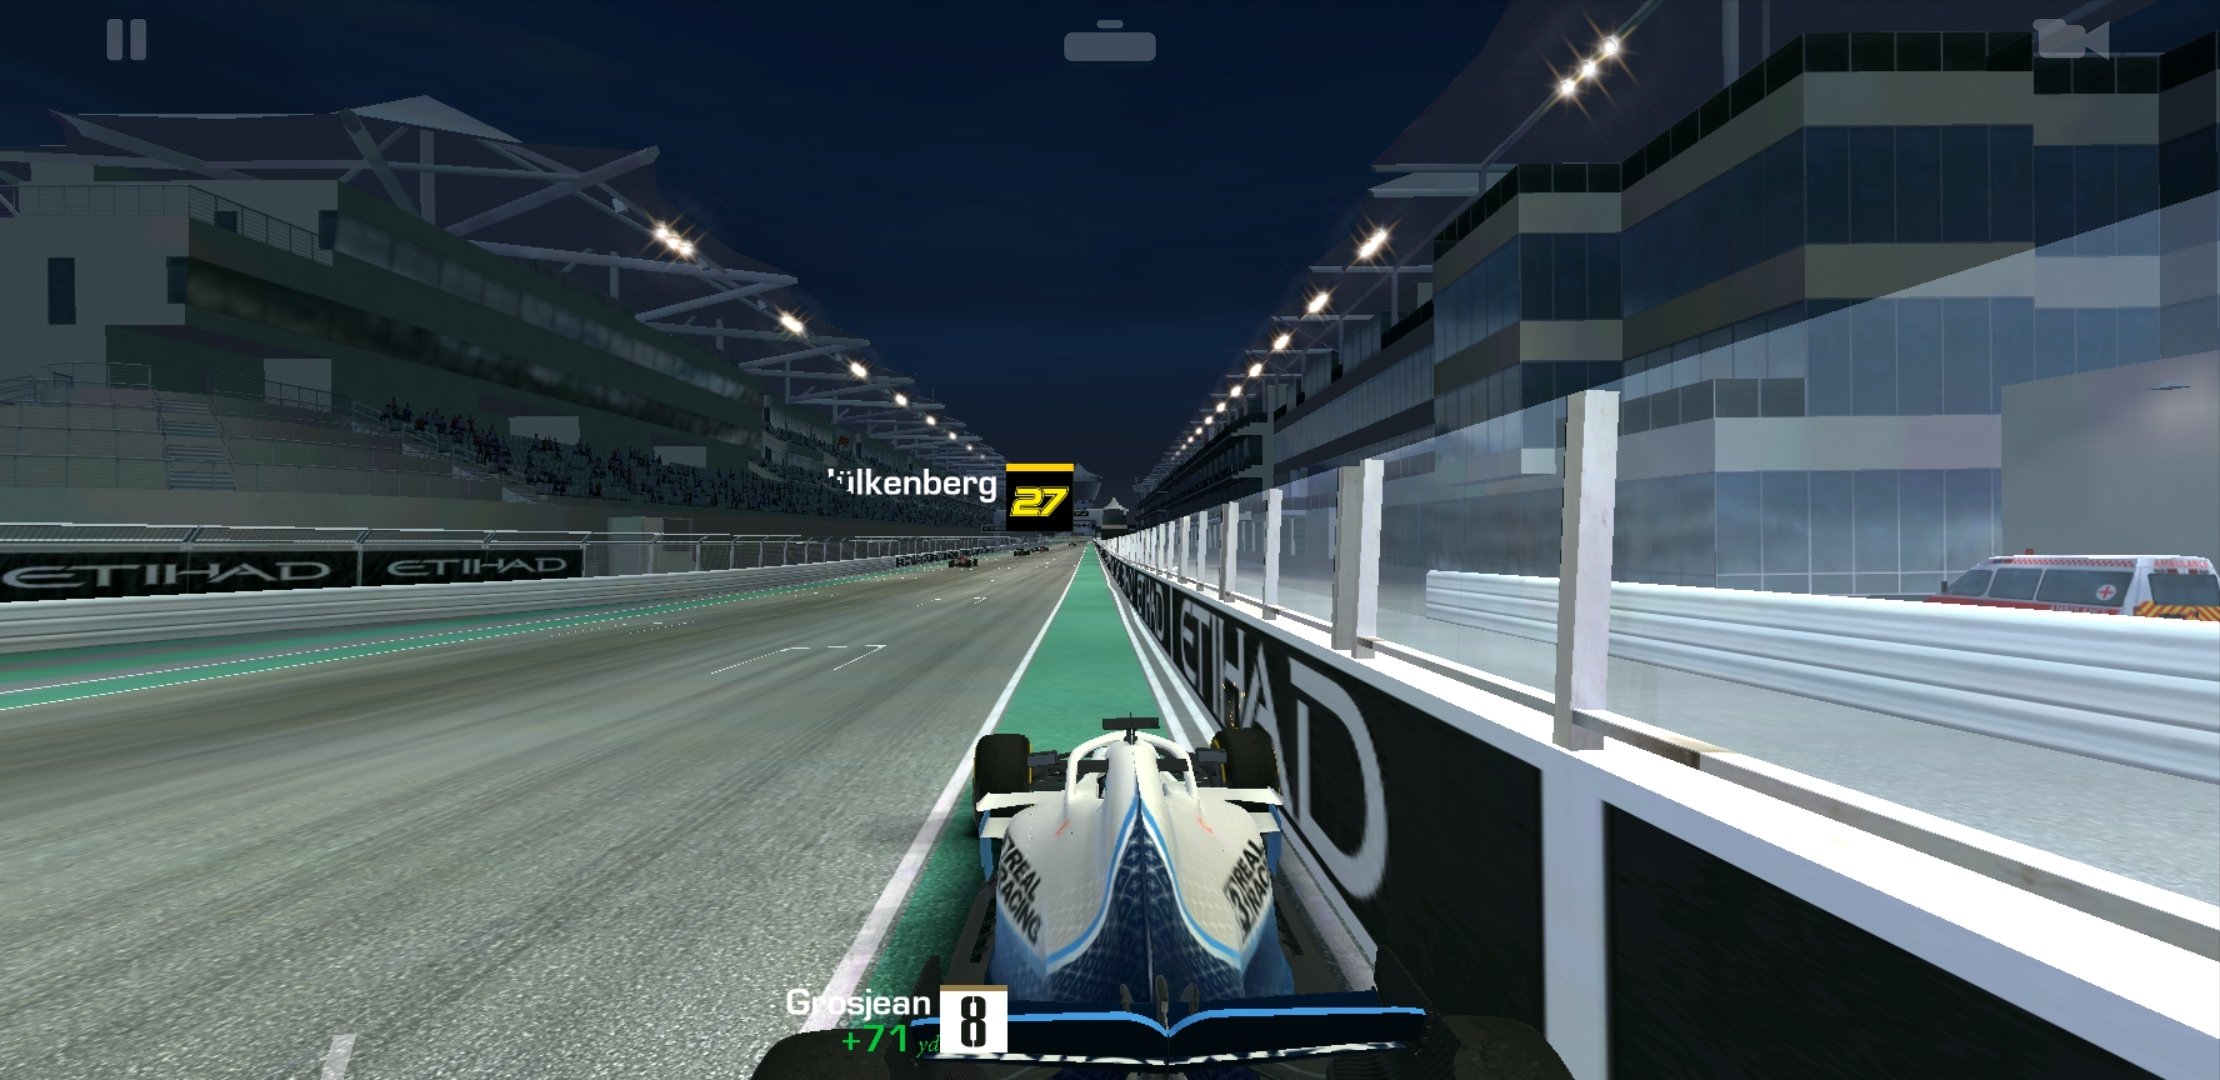 Real Racing 3 APK Download for Android Free